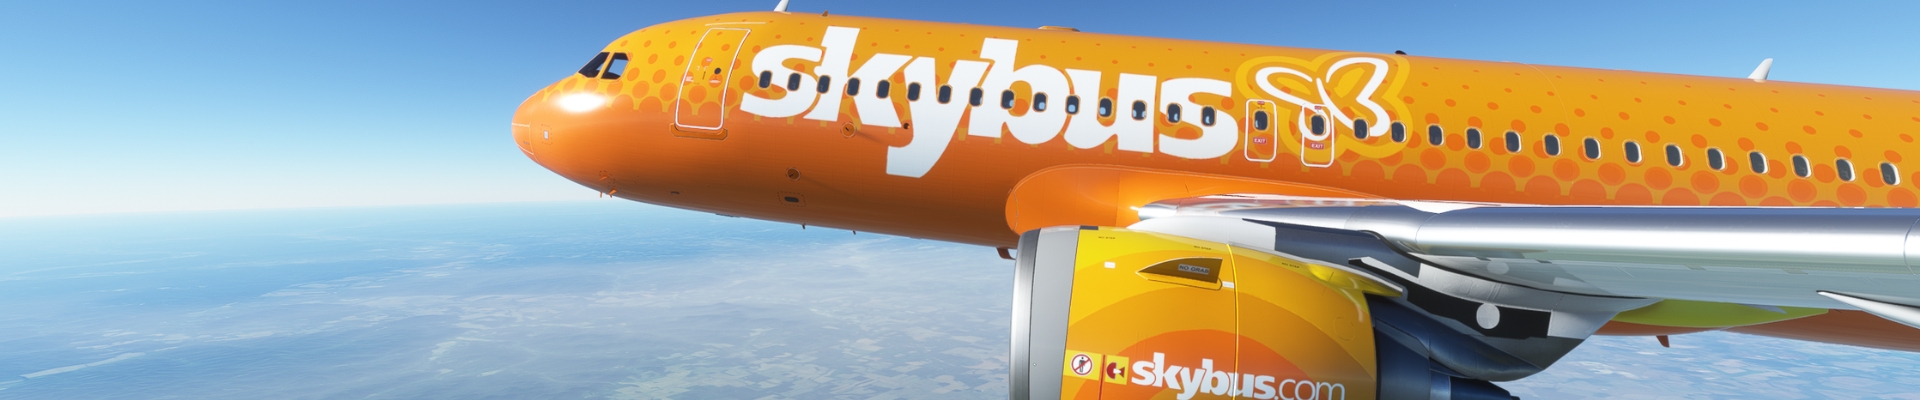 Home | Skybus Virtual Airlines